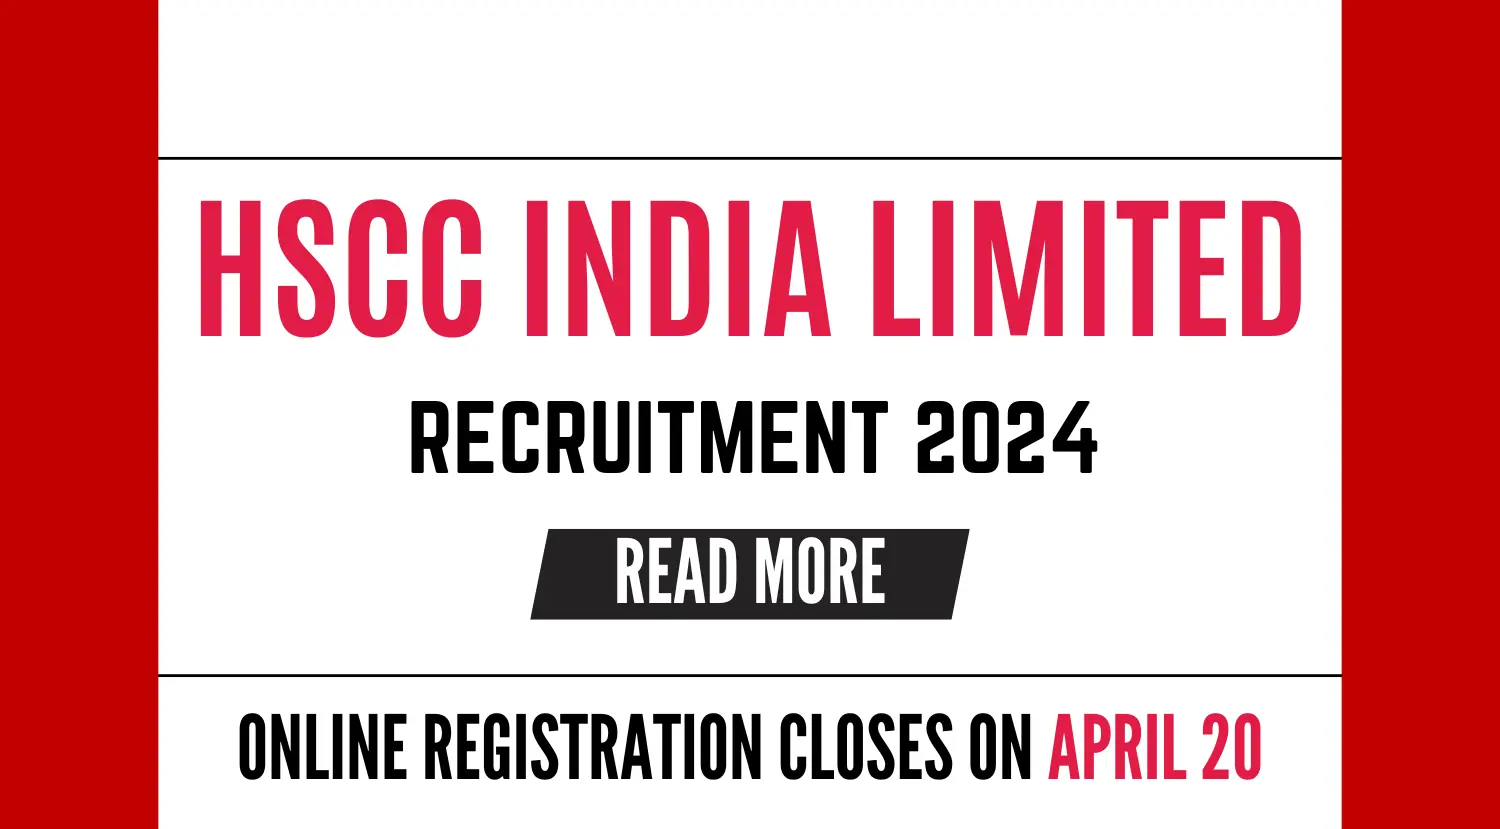 HSCC India Limited Recruitment 2024 Online Registration Closes on April 20 Apply Now